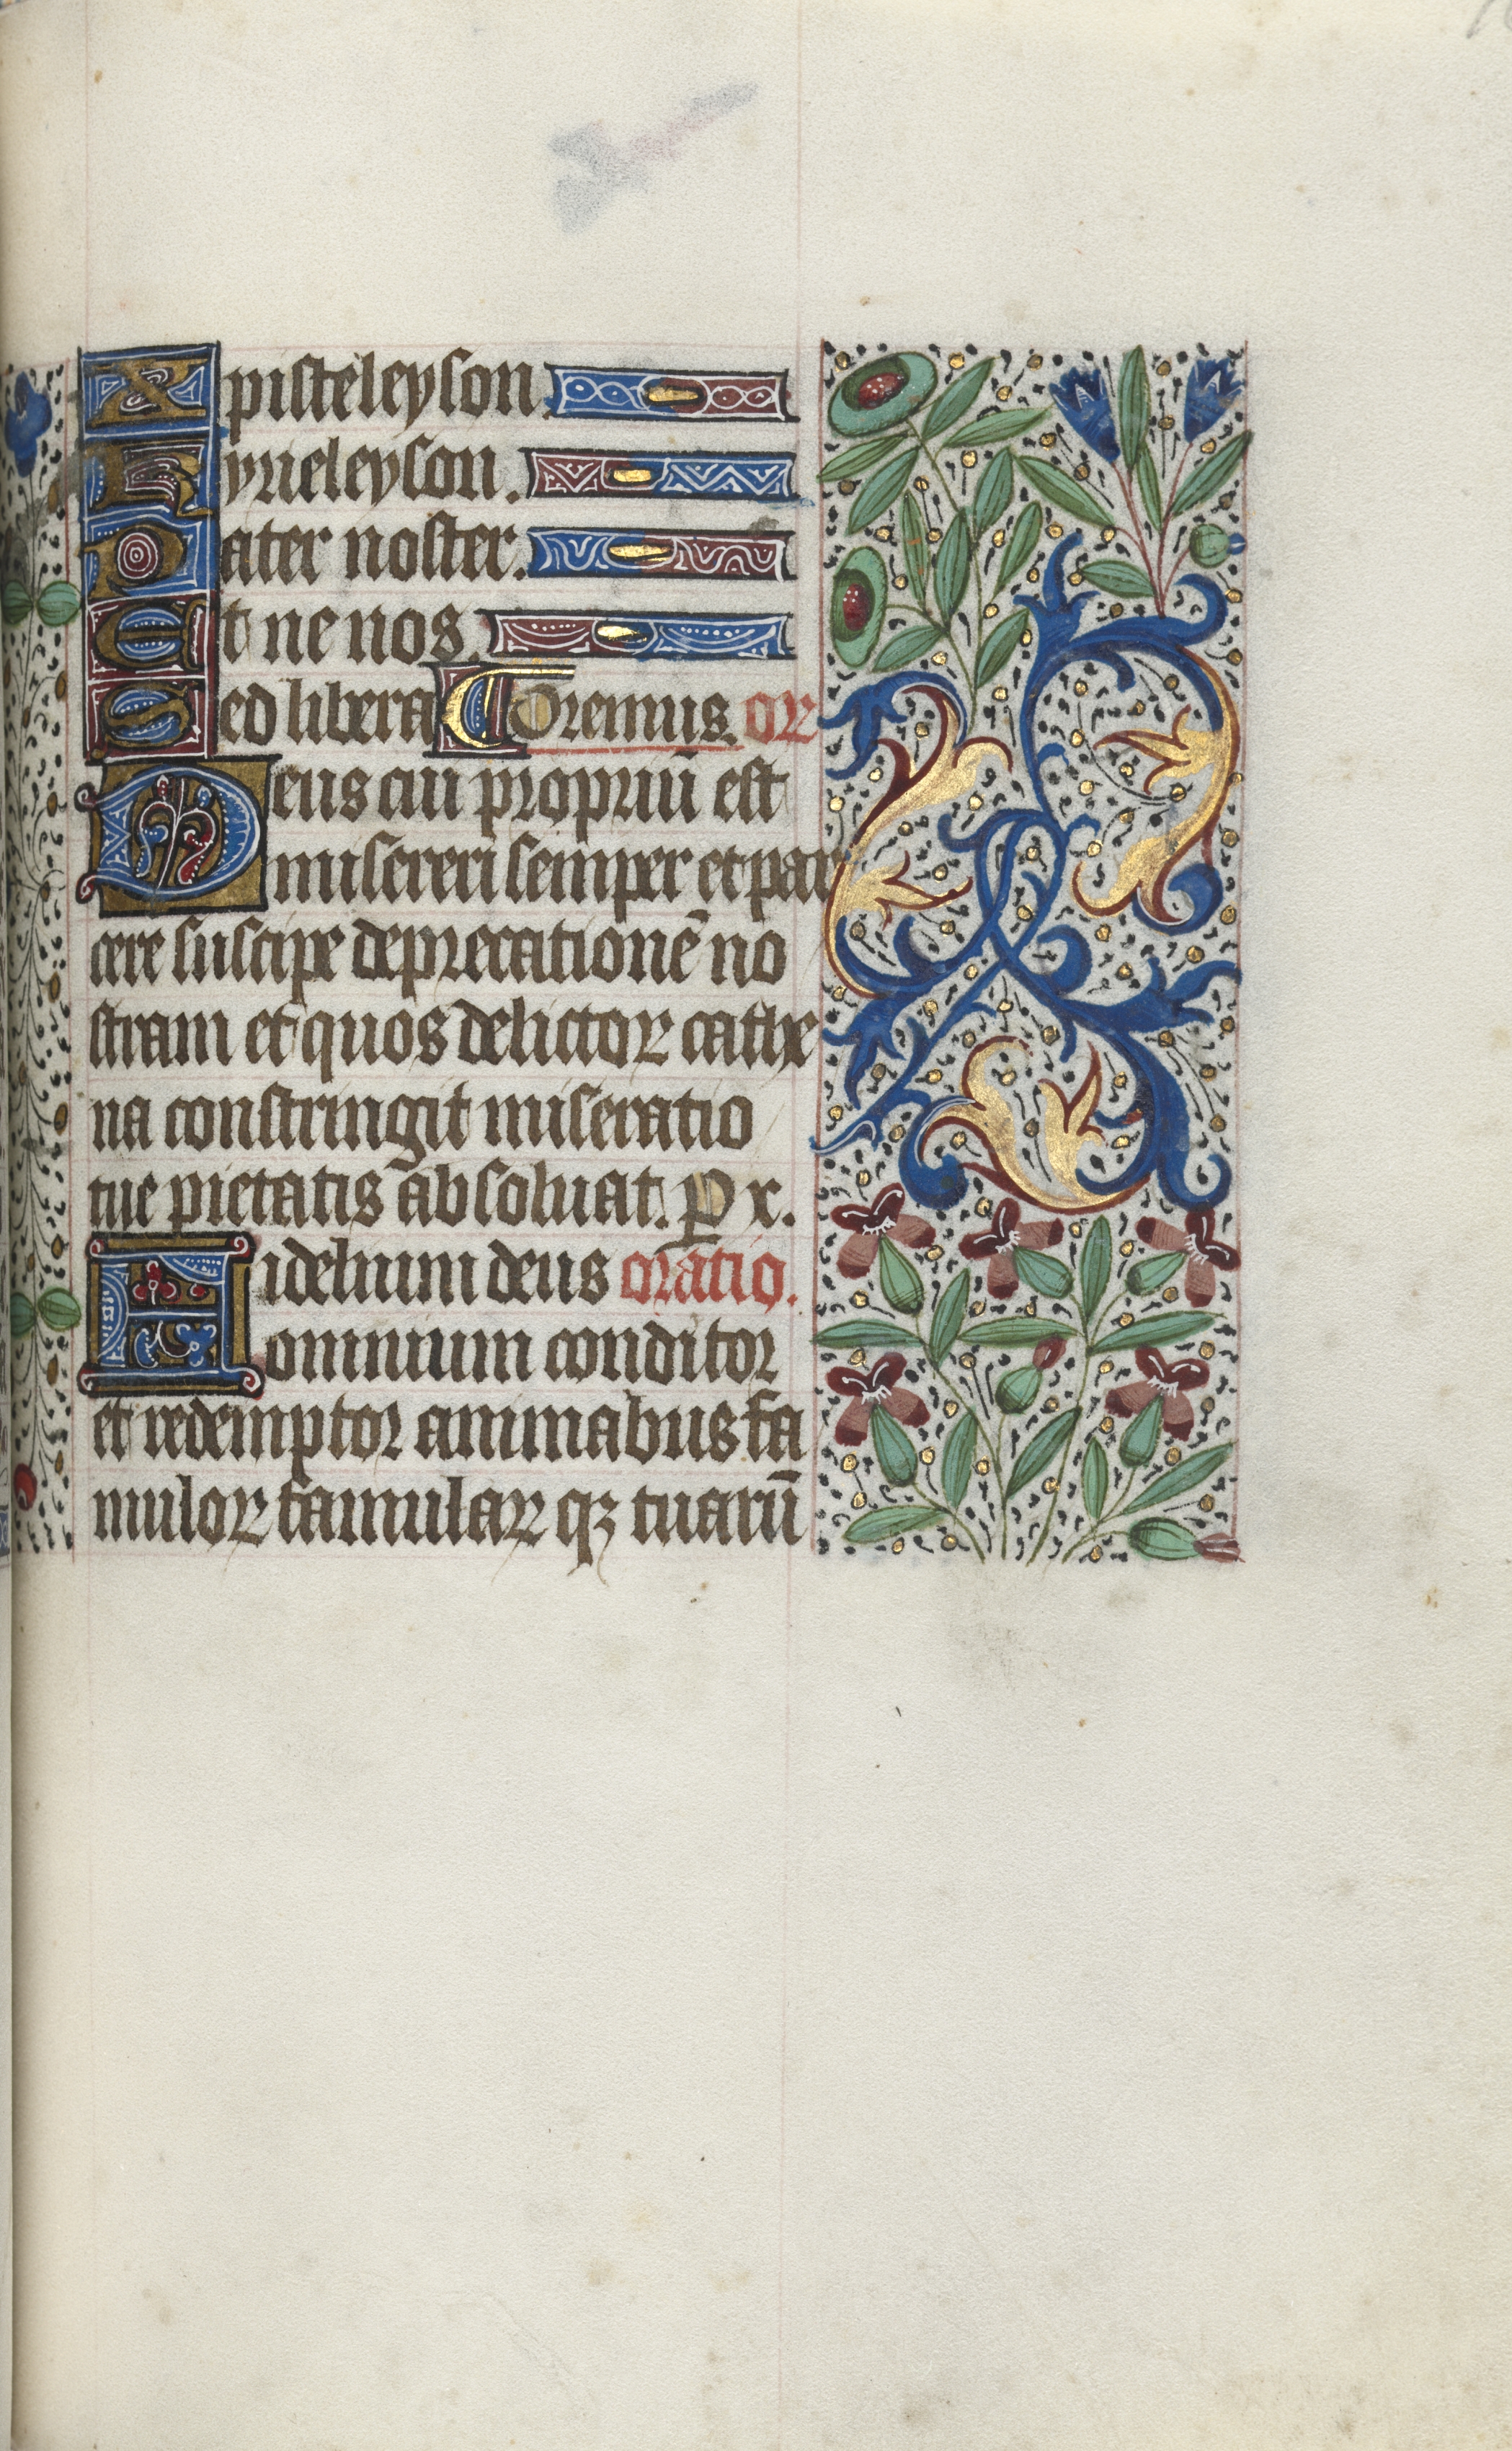 Book of Hours (Use of Rouen): fol. 96r